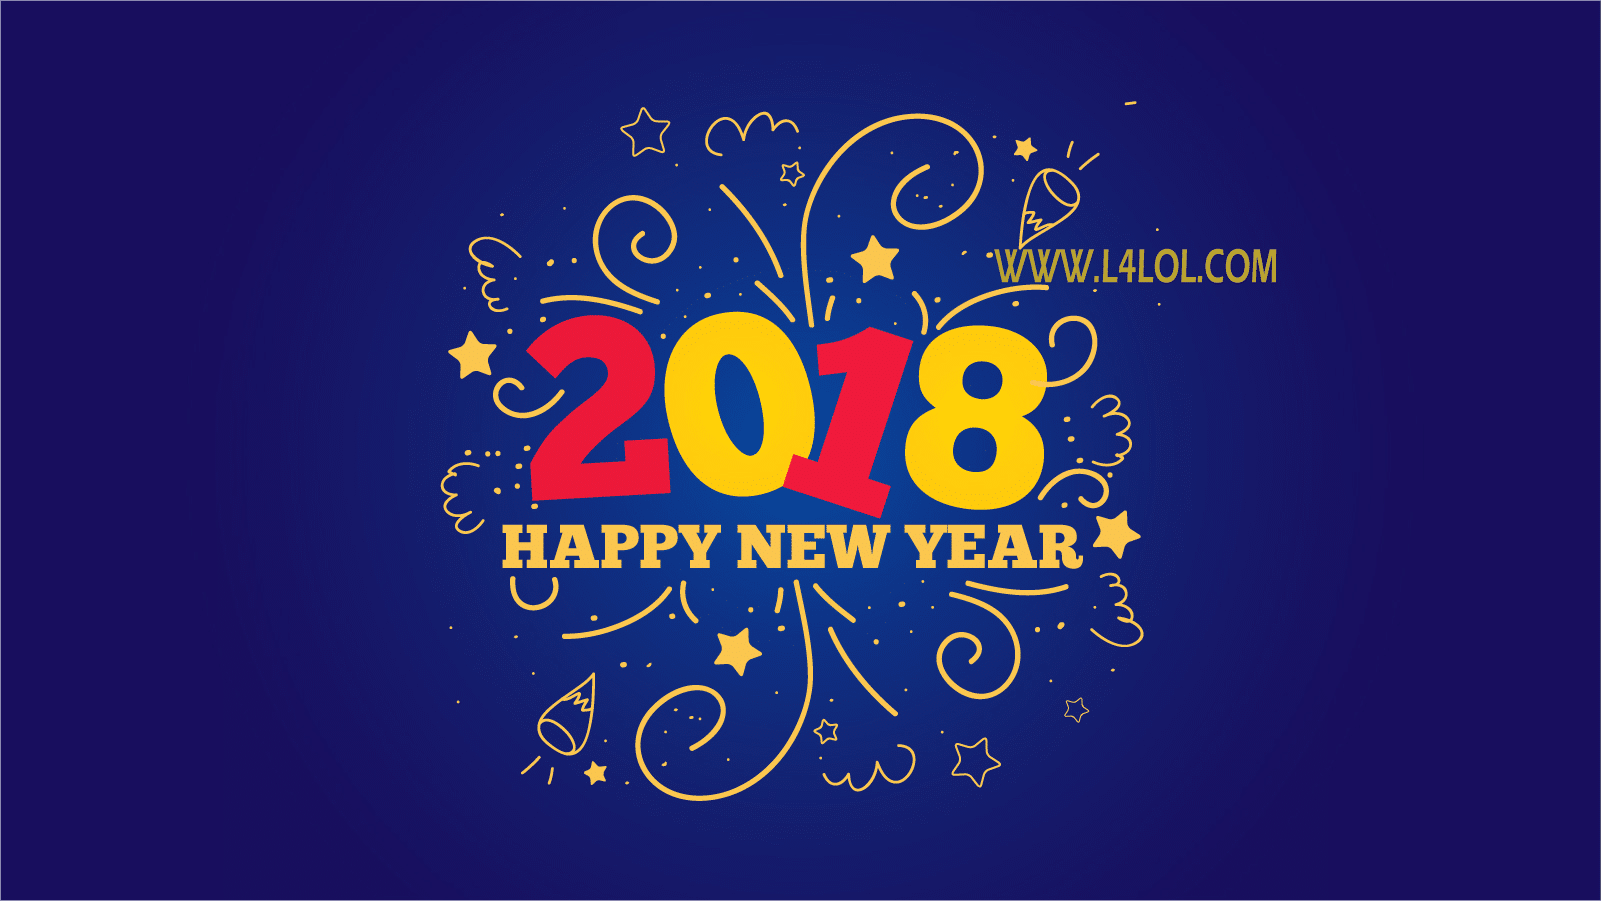 Download Free Happy New Year 2019 HD Wallpaper For Mobile PC Desktop